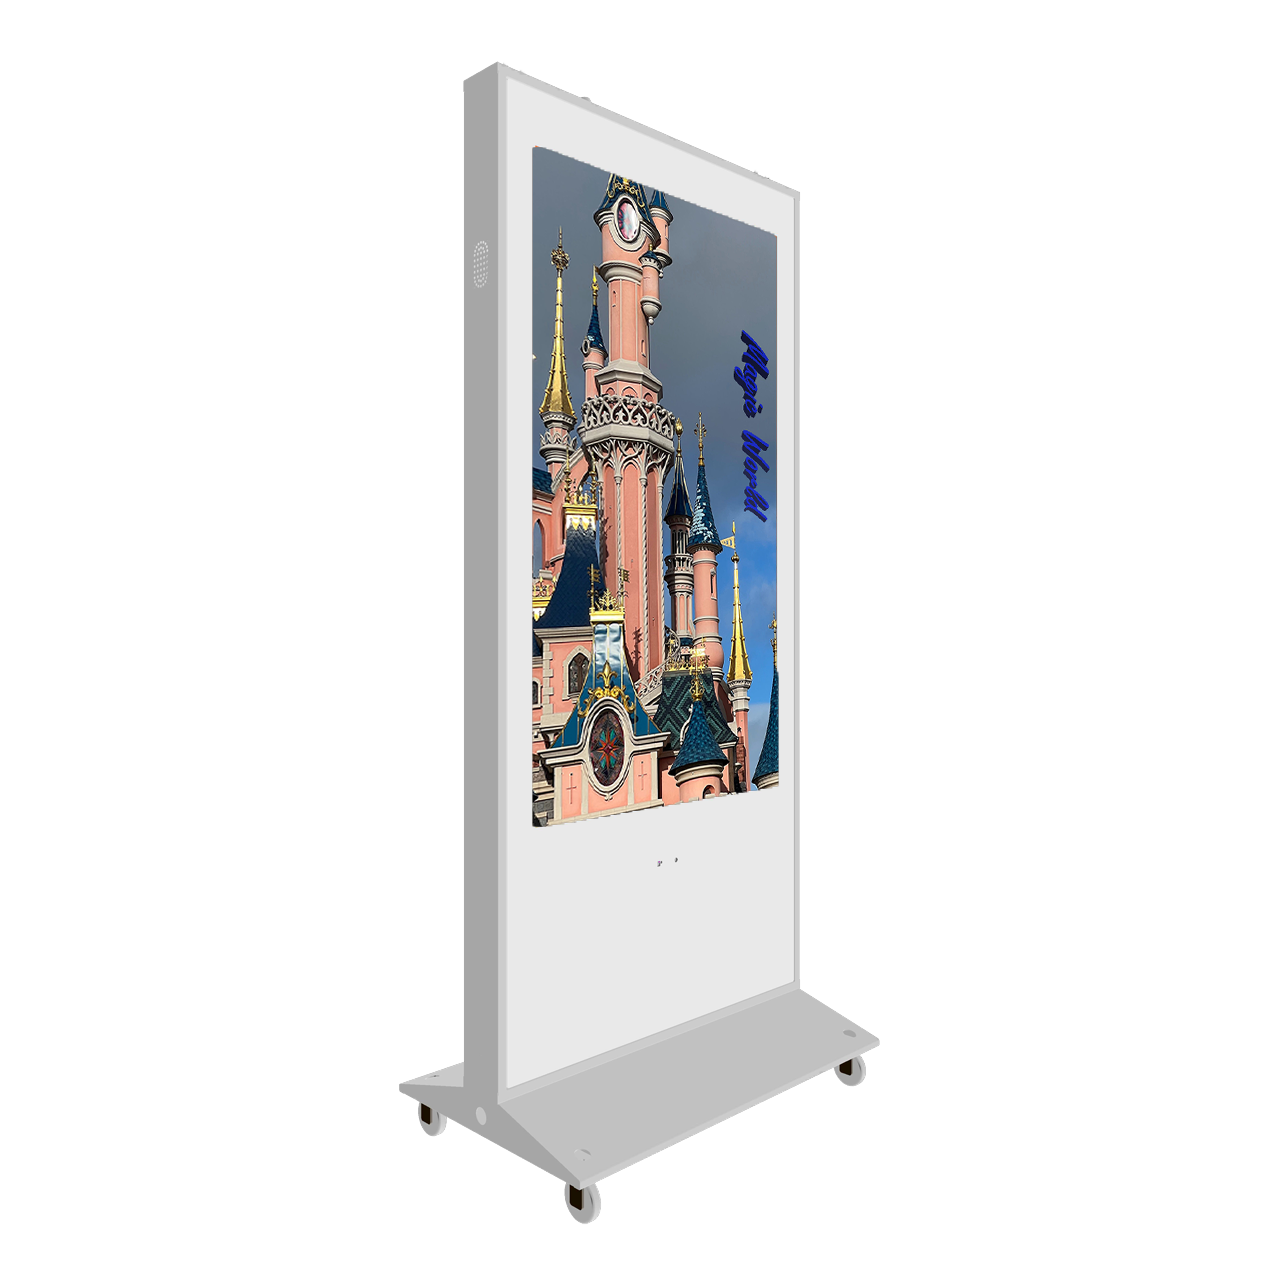 49-inch white outdoor digital signage